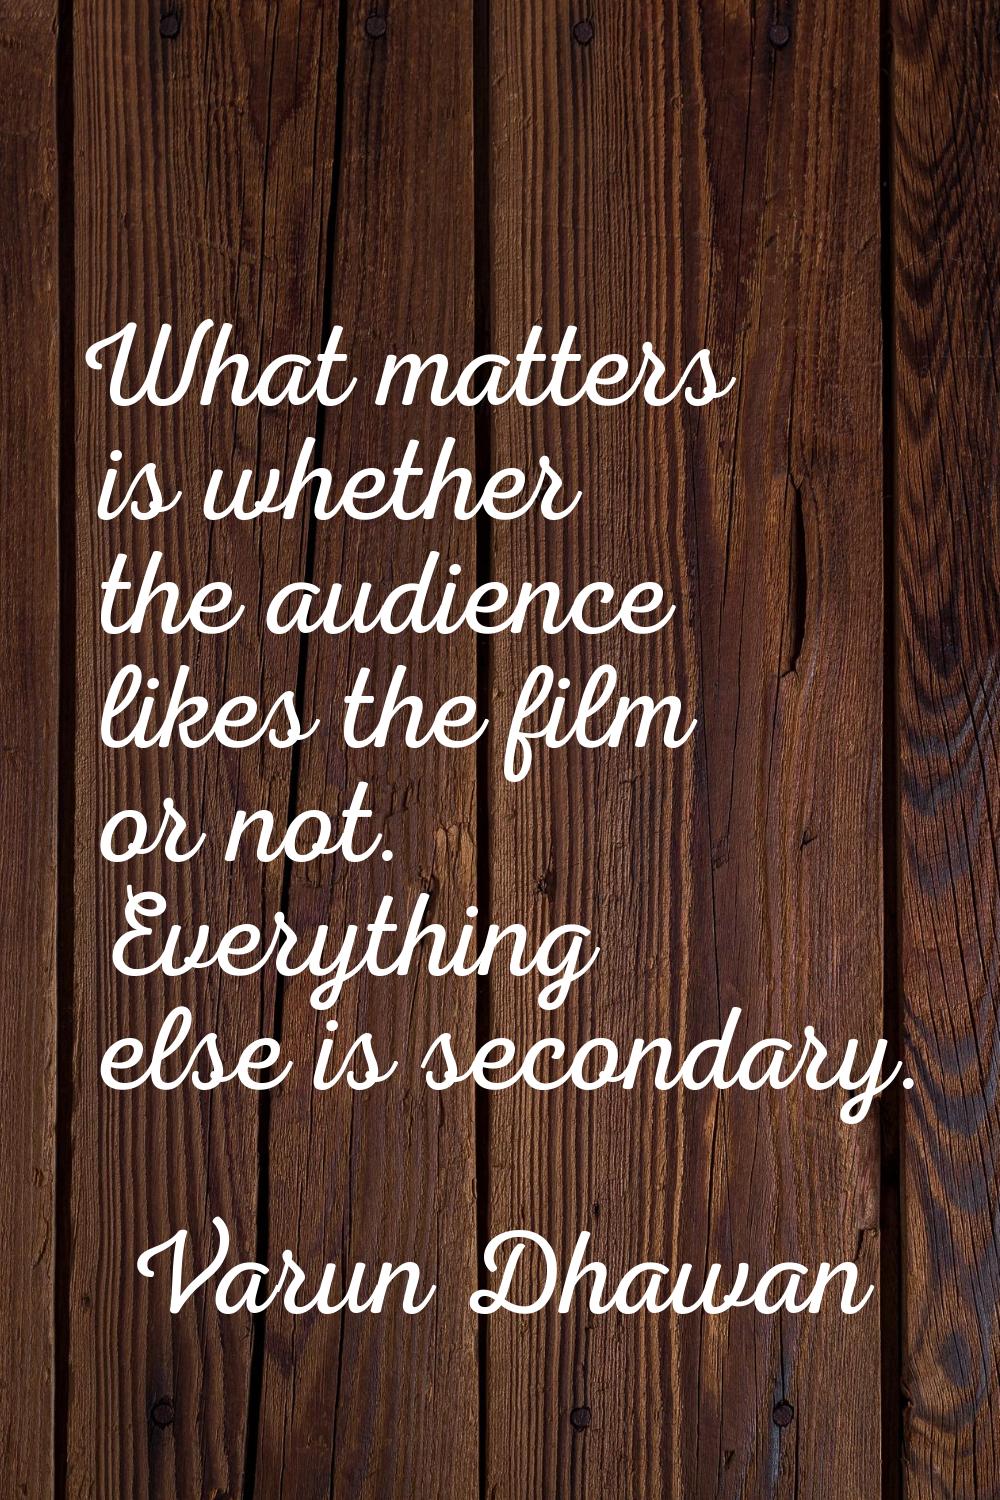 What matters is whether the audience likes the film or not. Everything else is secondary.